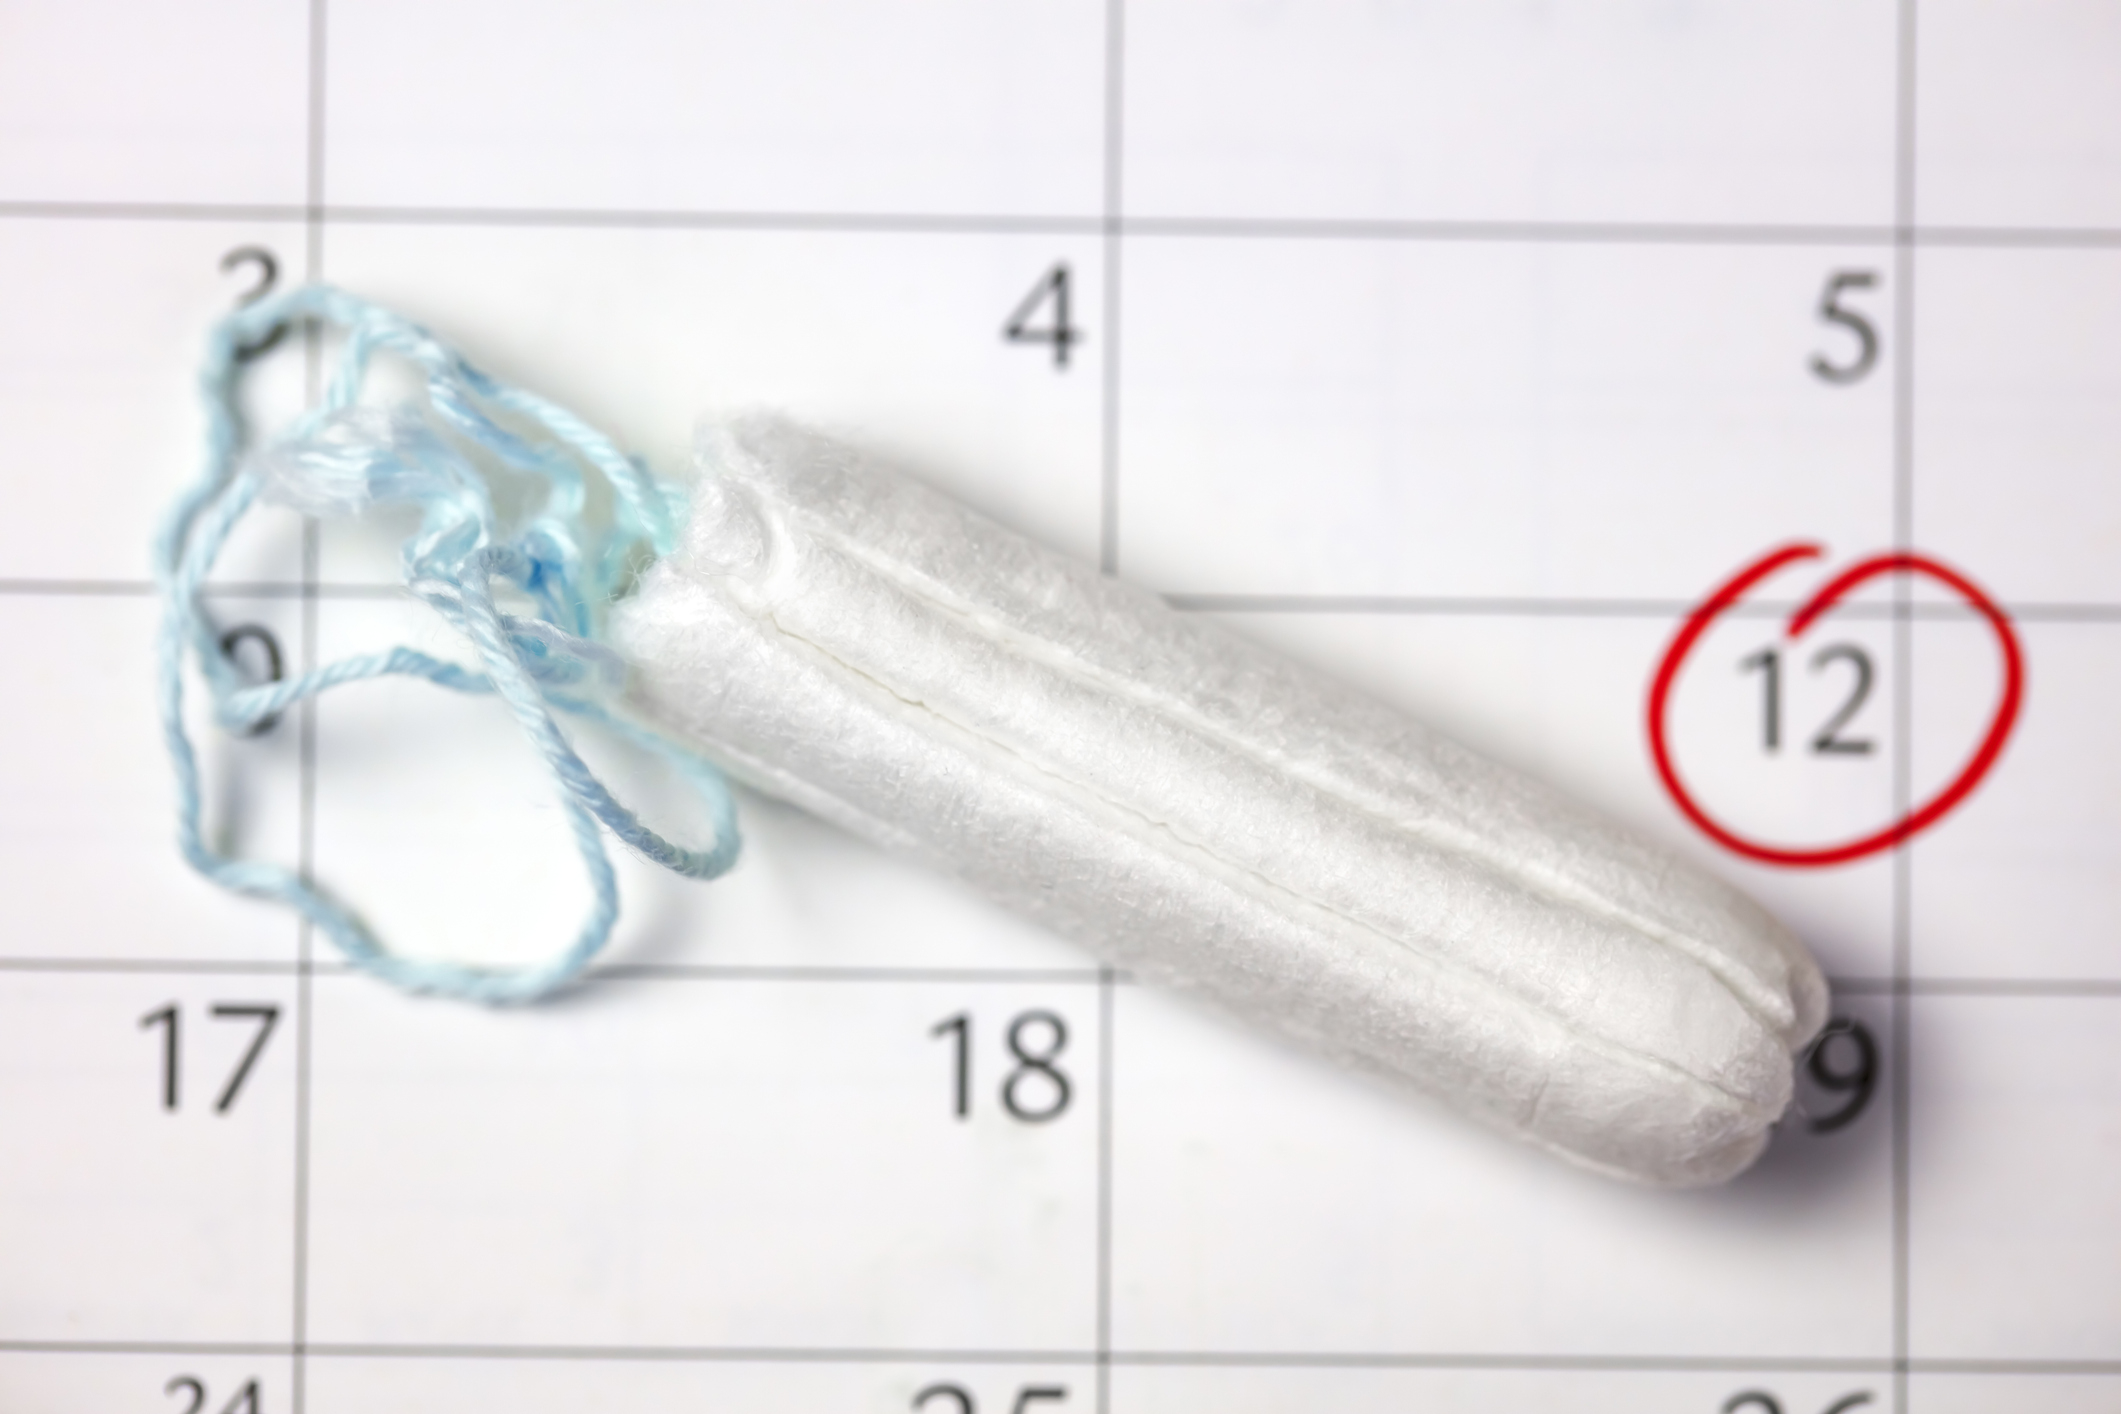 Tampon on a calendar highlighting date 12, implying menstrual cycle tracking for work absence planning